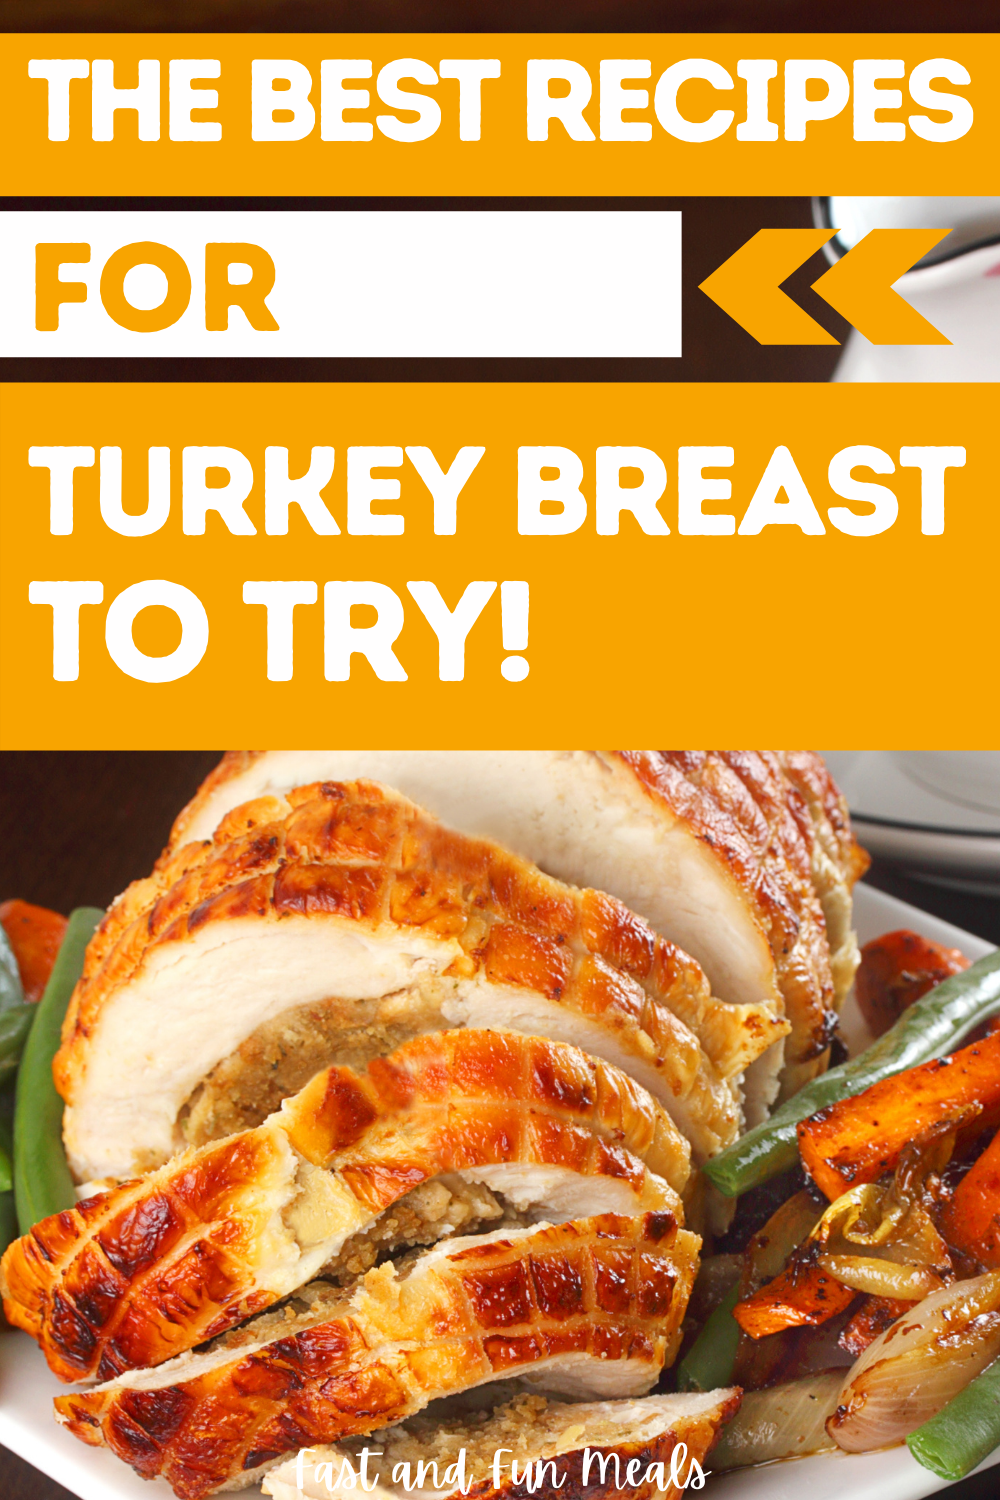 Pin showing the title The Best Recipes for Turkey Breast to Try!